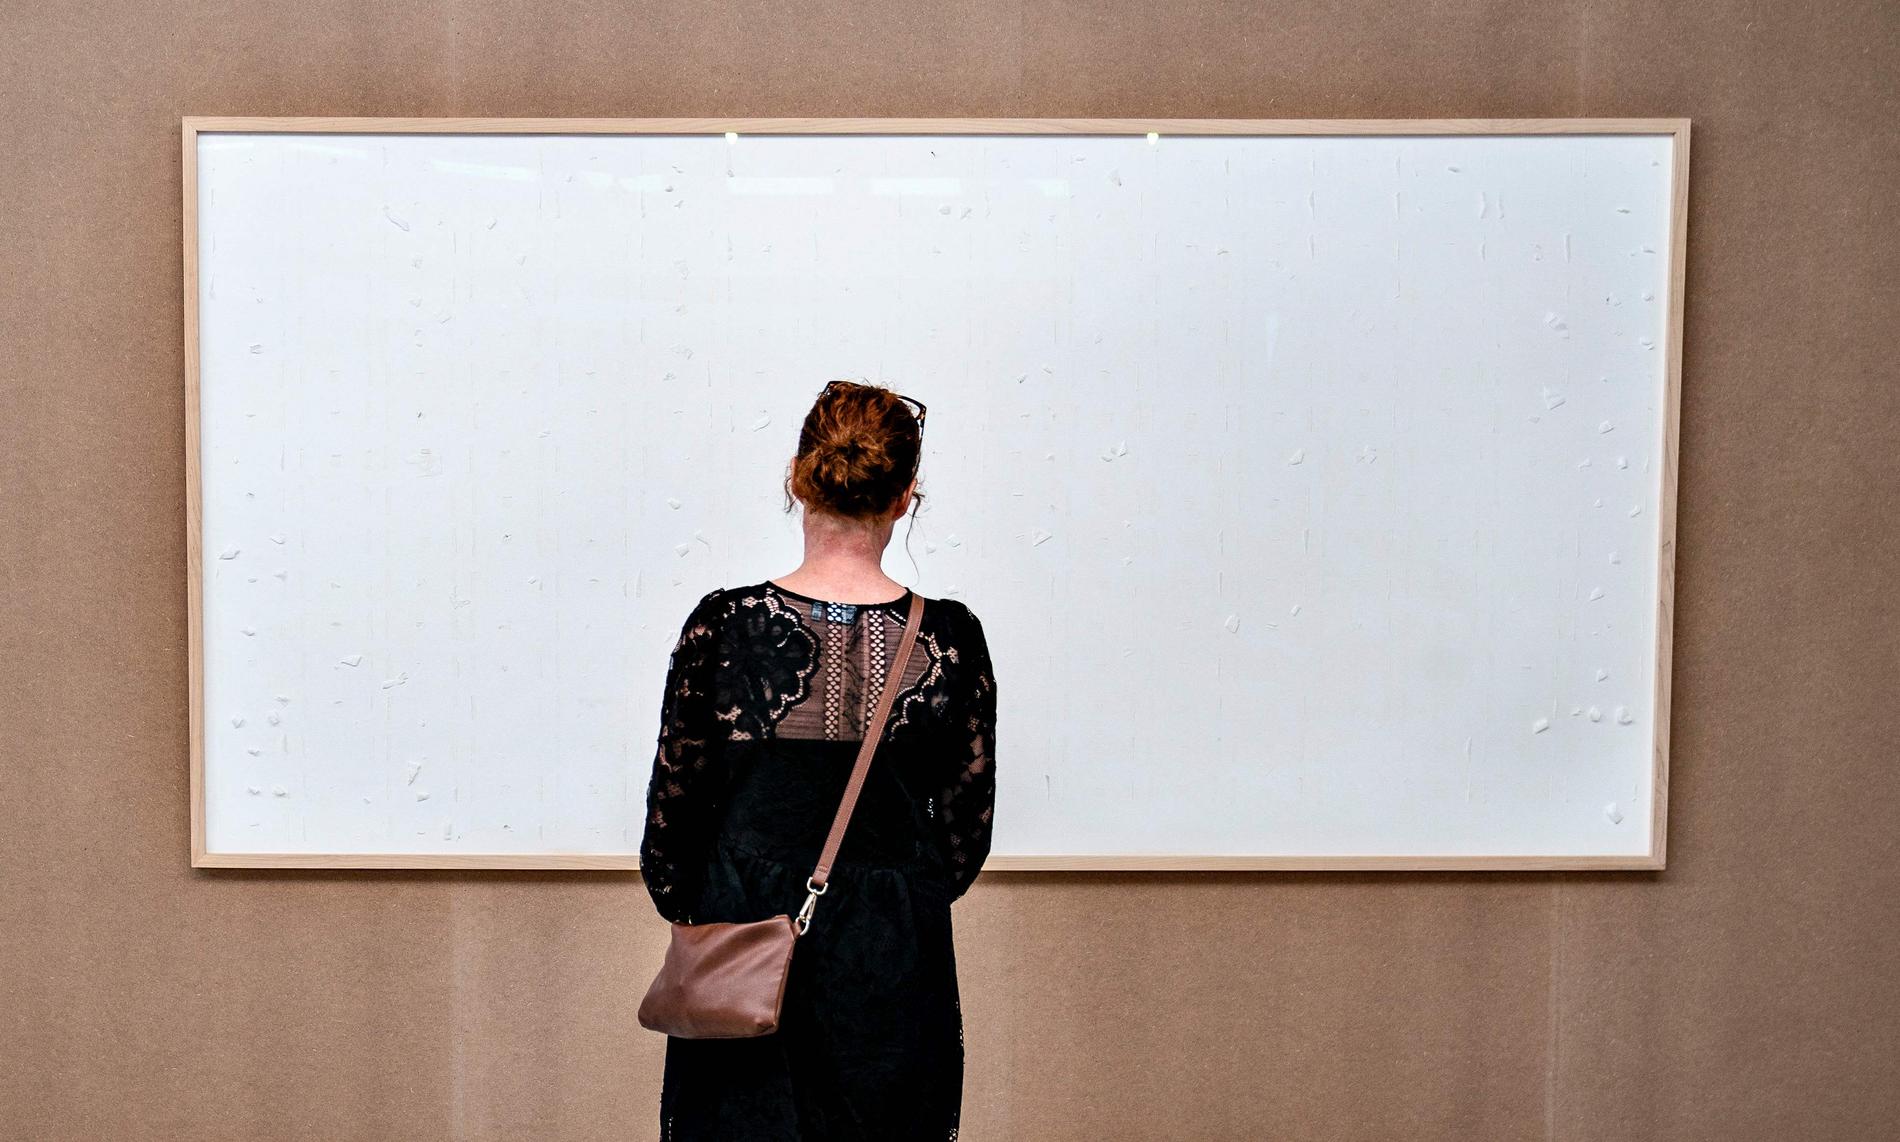 A Danish artist delivered blank canvases: now he has to pay back 775,000 Norwegian kroner